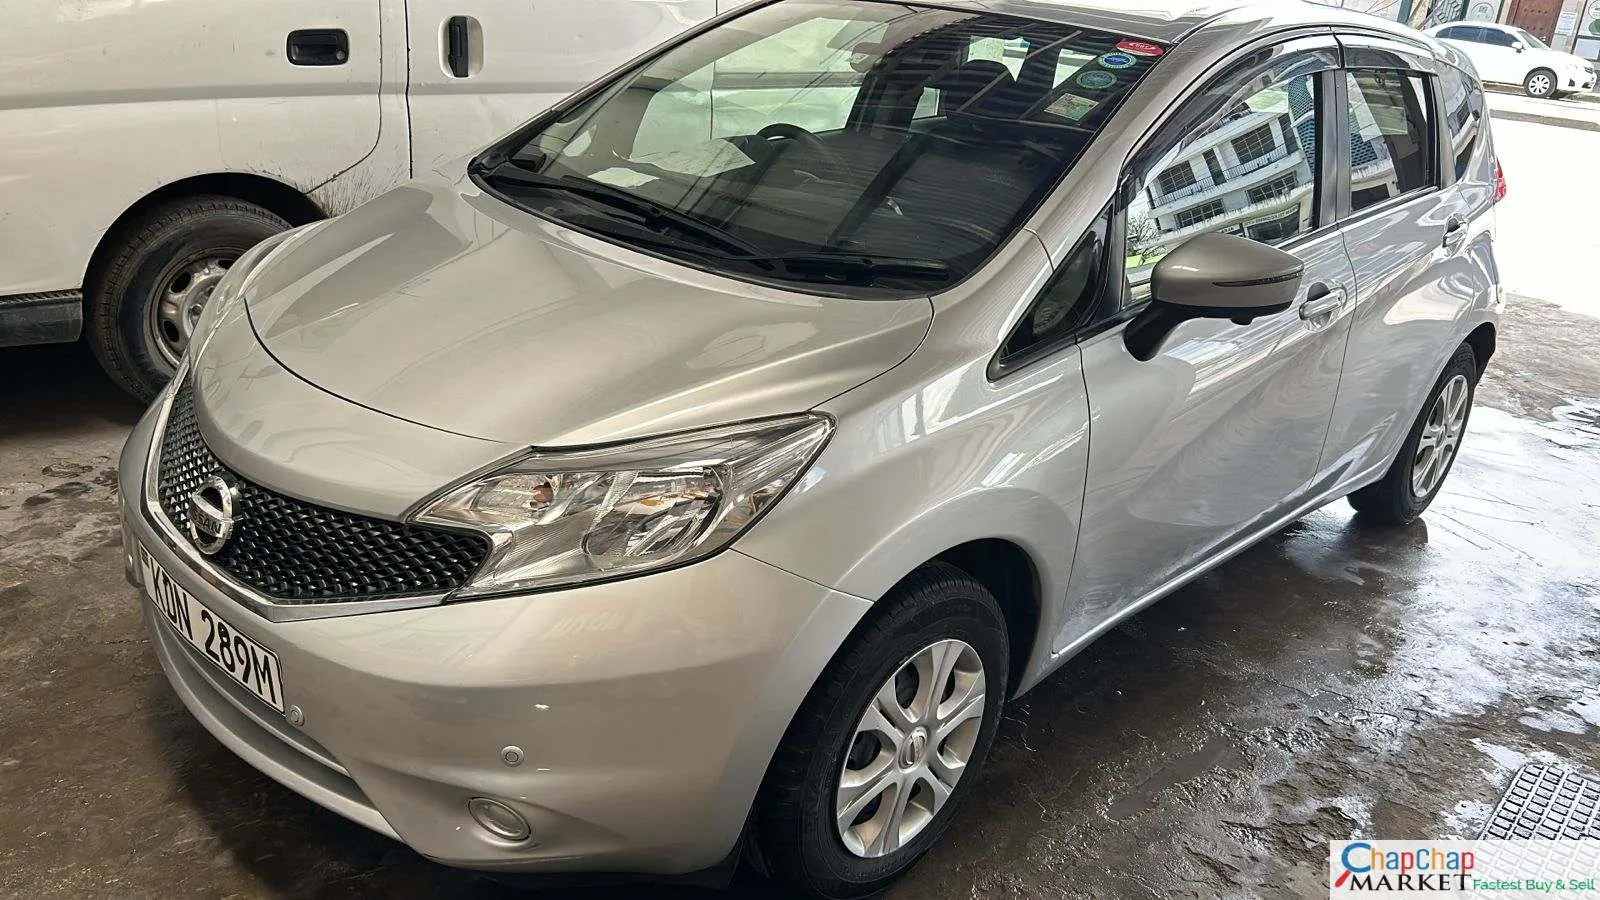 Cars Cars For Sale-Nissan Note for sale in kenya hire purchase You ONLY Pay 20% Deposit Trade in Ok Wow EXCLUSIVE! DIGS 4